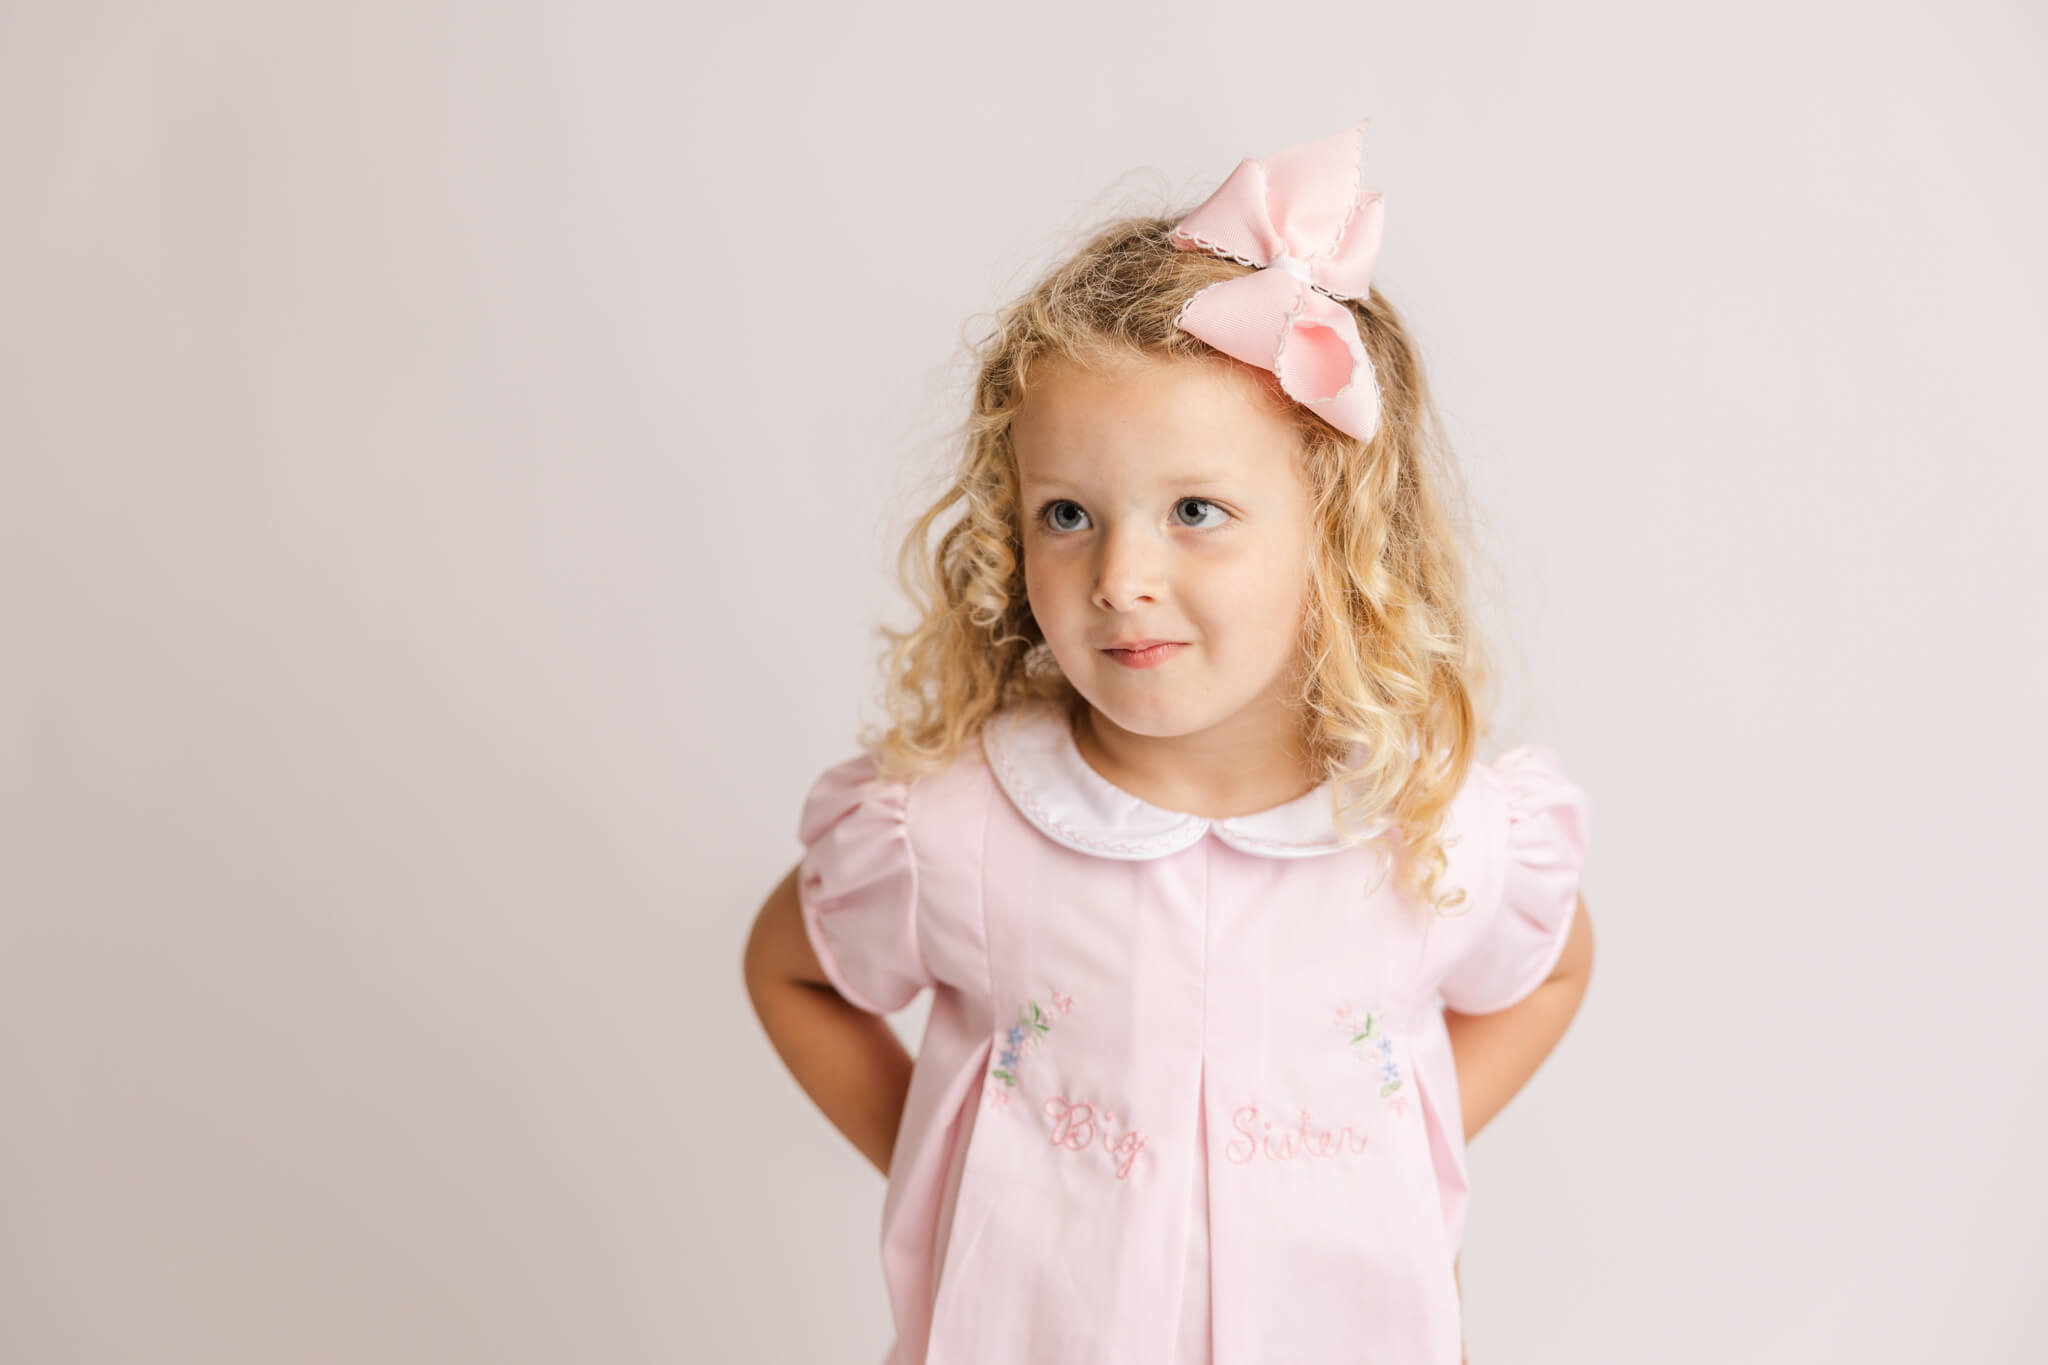 Little girl in pink dress and large bow looking off camera Augusta Cheer Academy